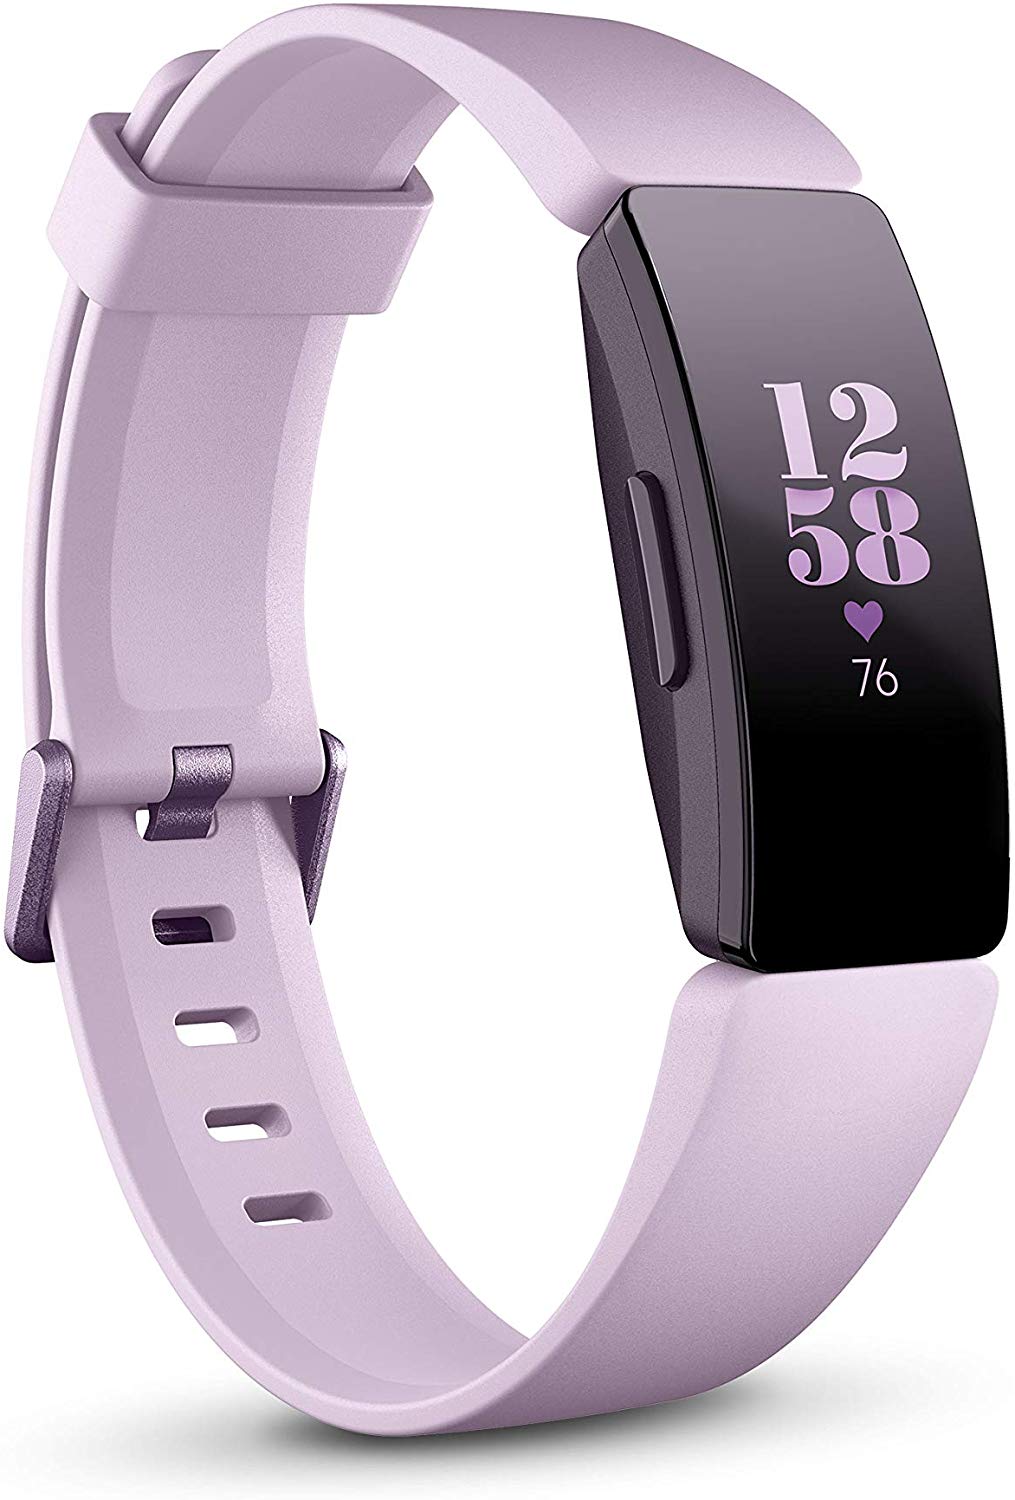 Cheapest Fitbit in 2020: Get in shape 